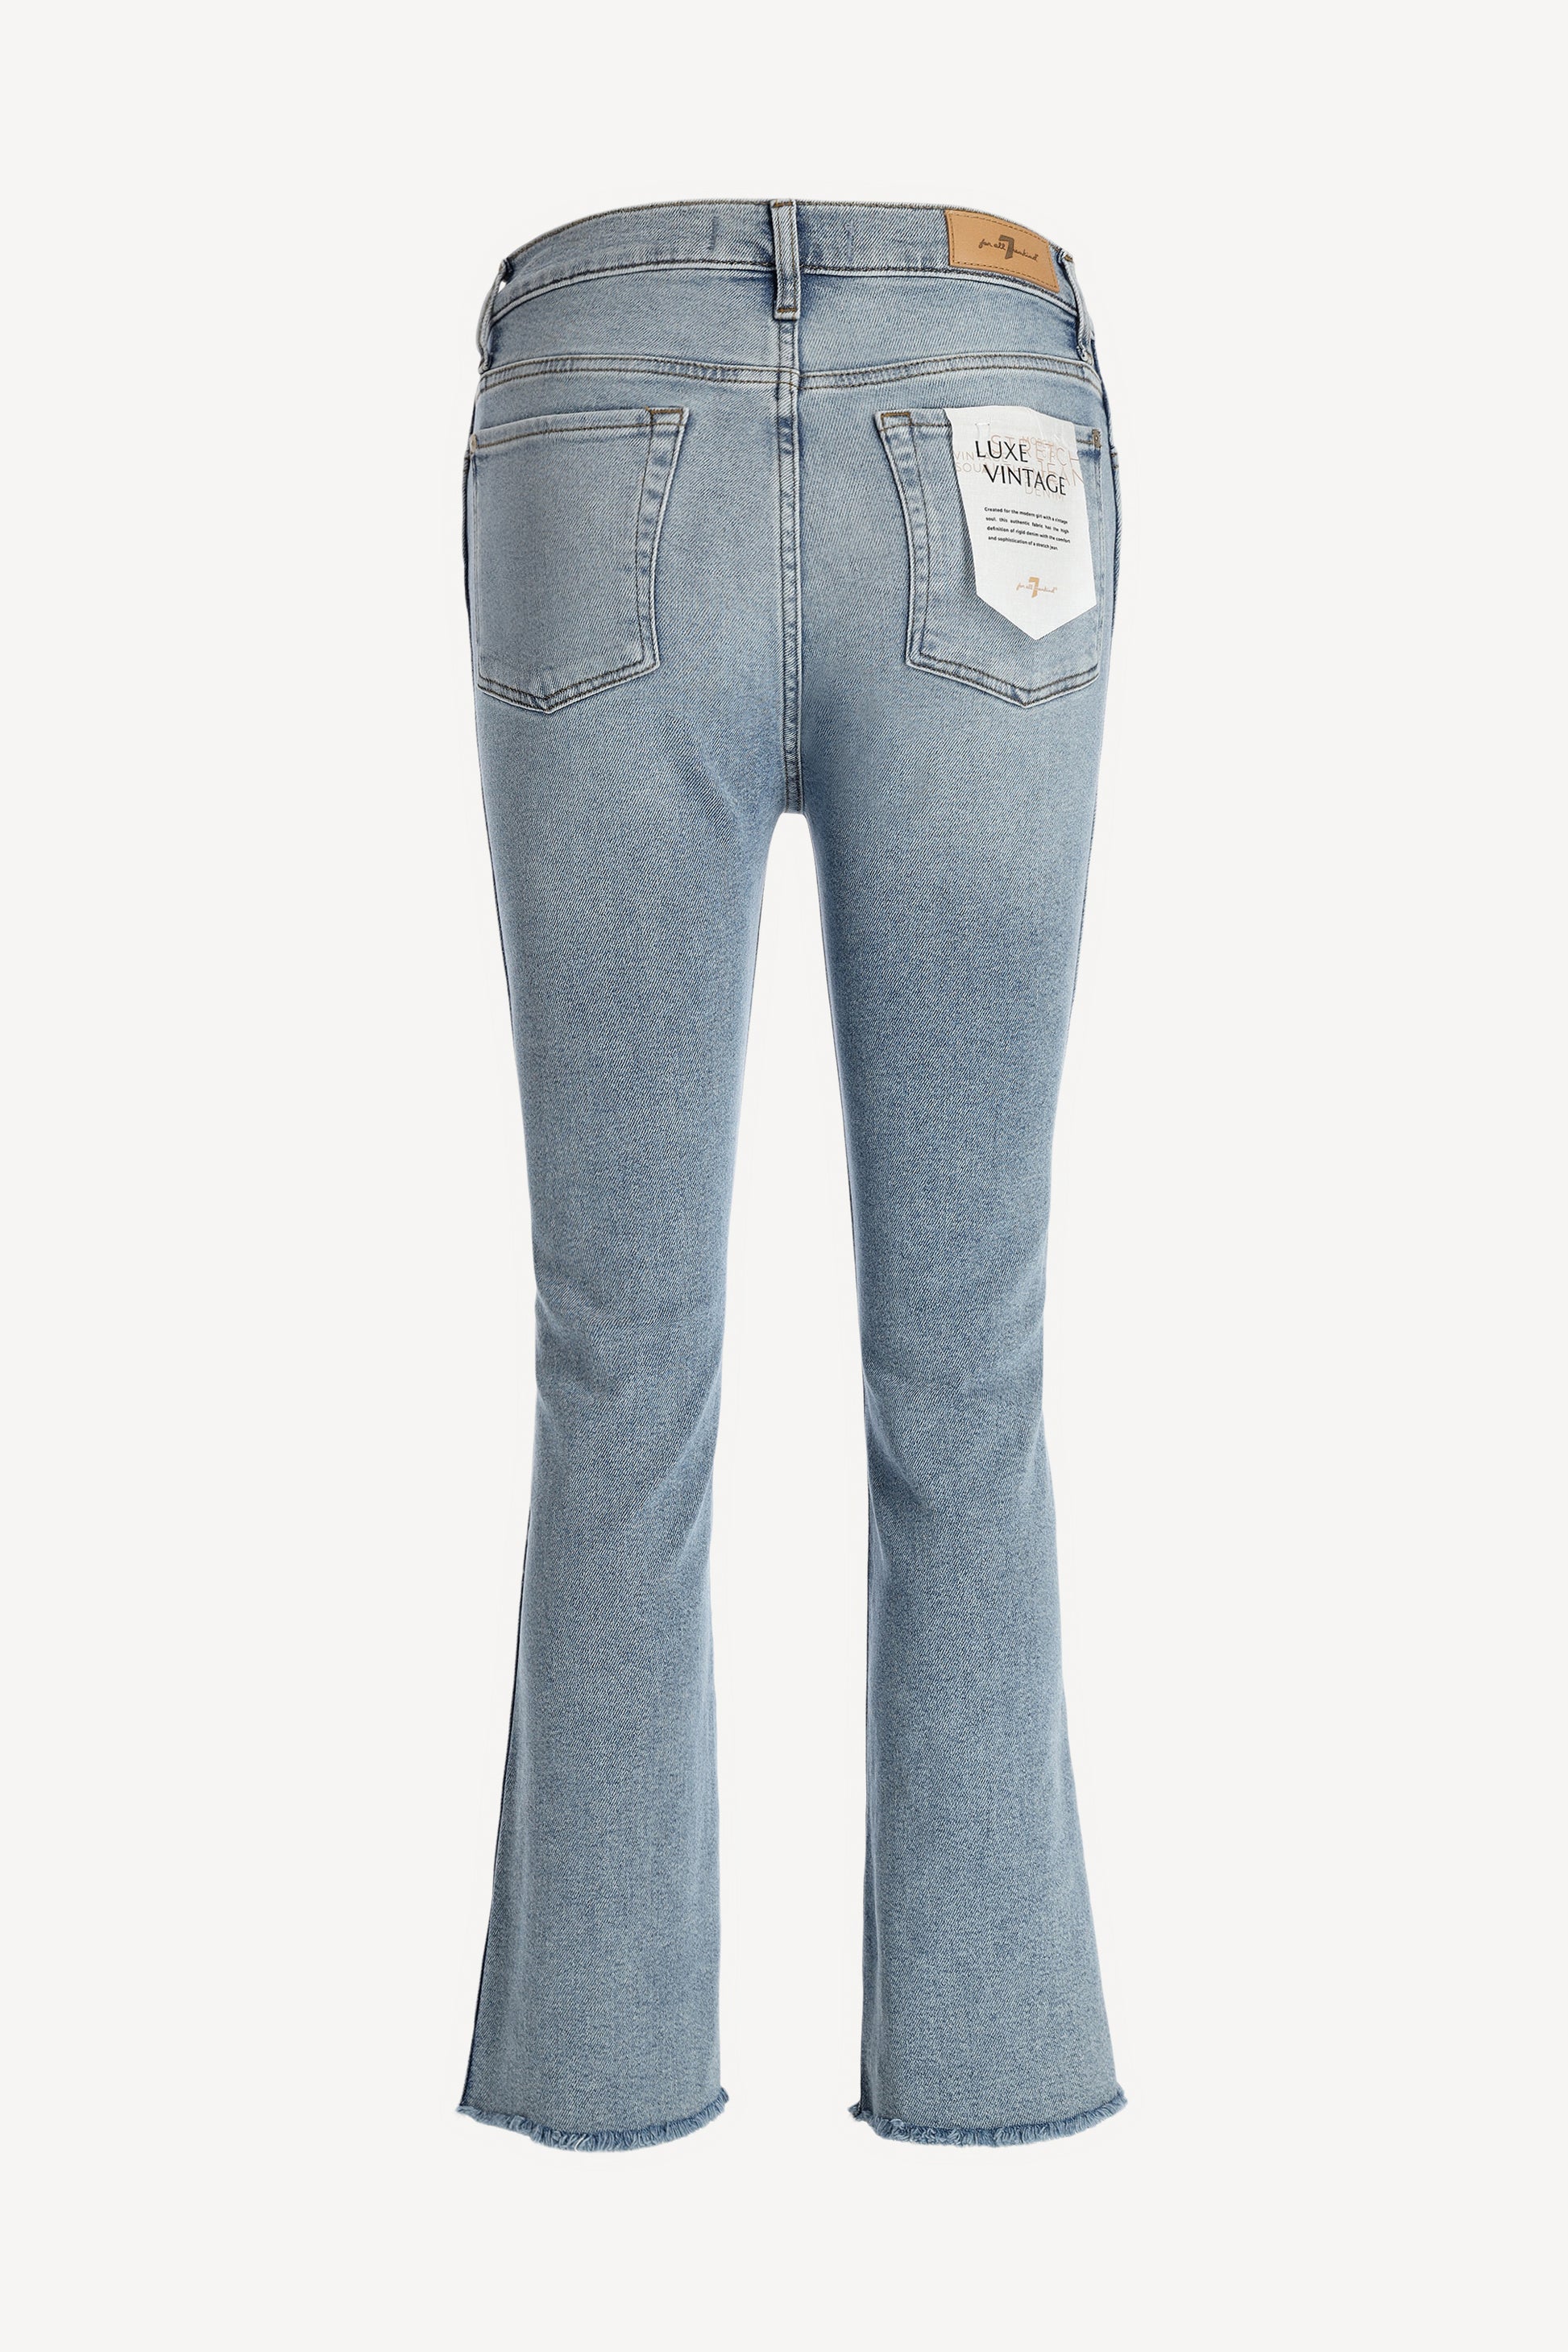 Jeans HW Slim Kick in Mid Blue7 For All Mankind - Anita Hass